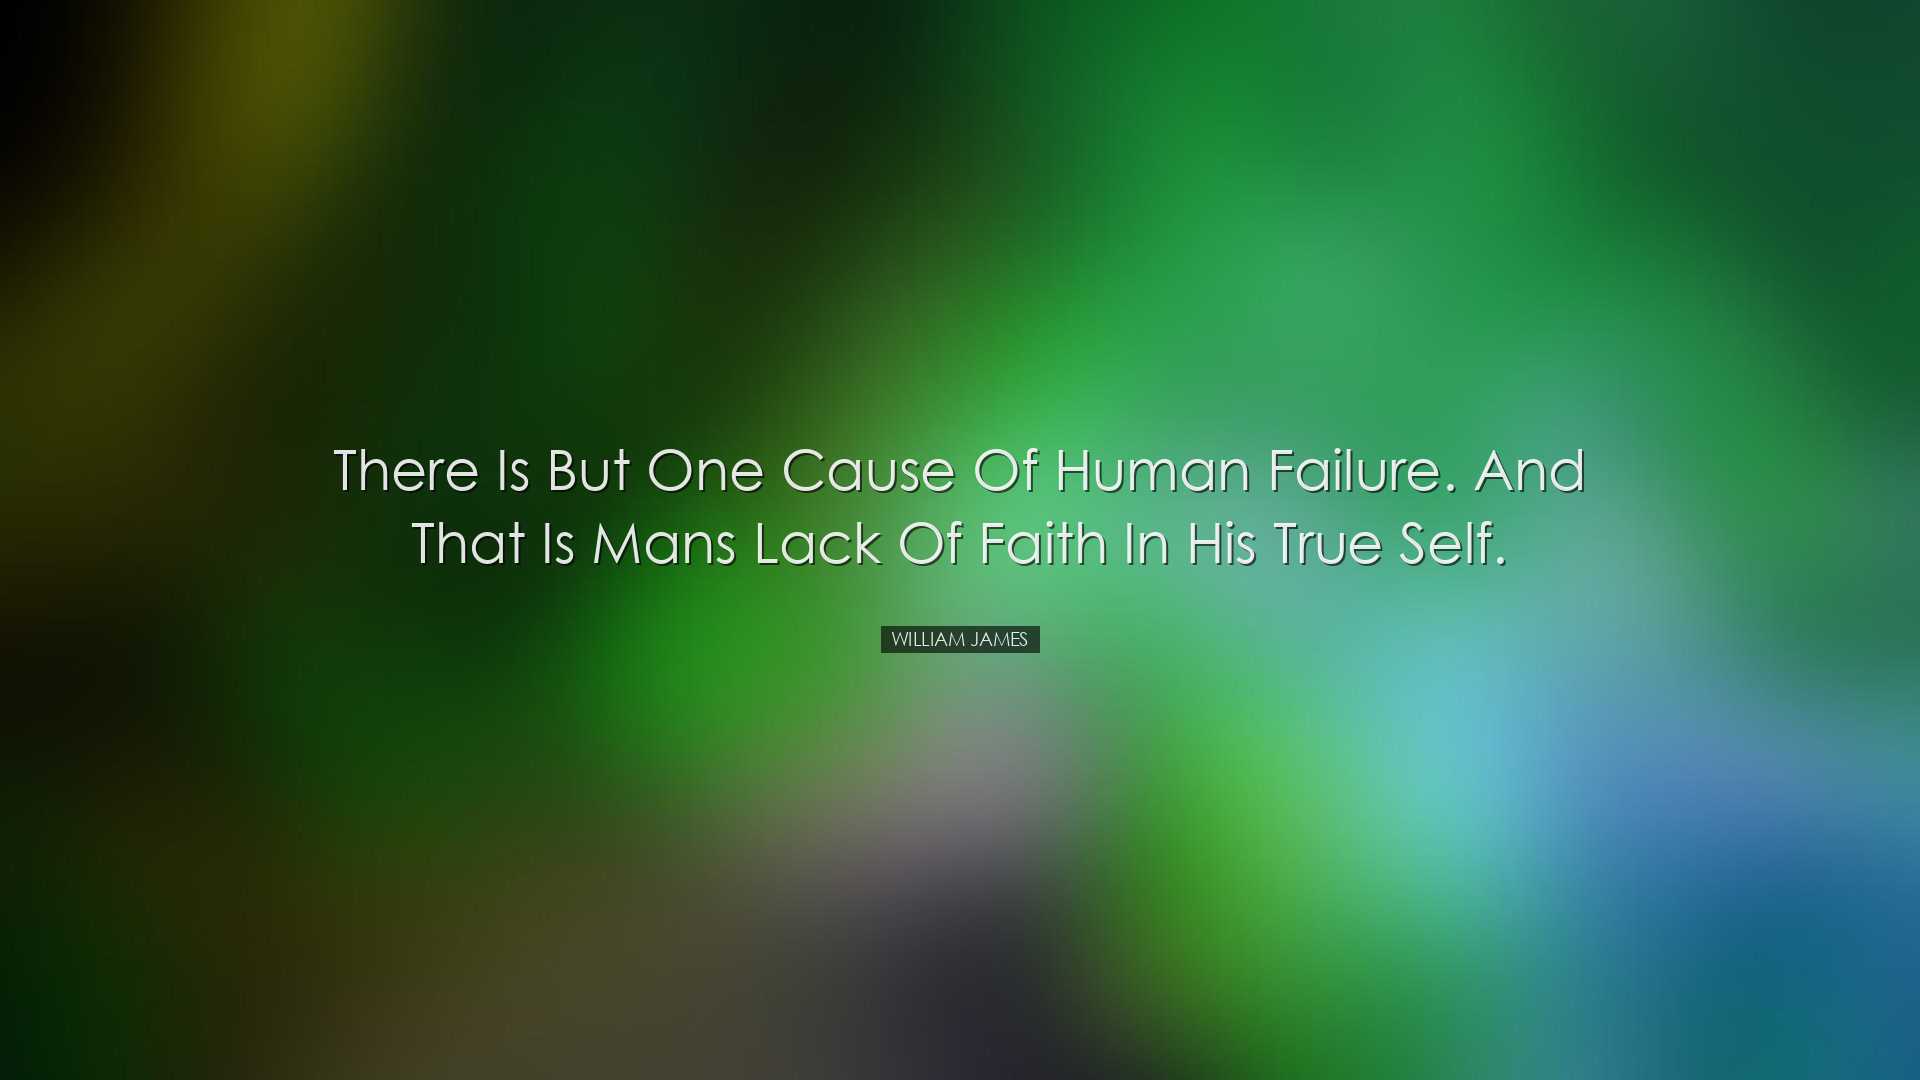 There is but one cause of human failure. And that is mans lack of